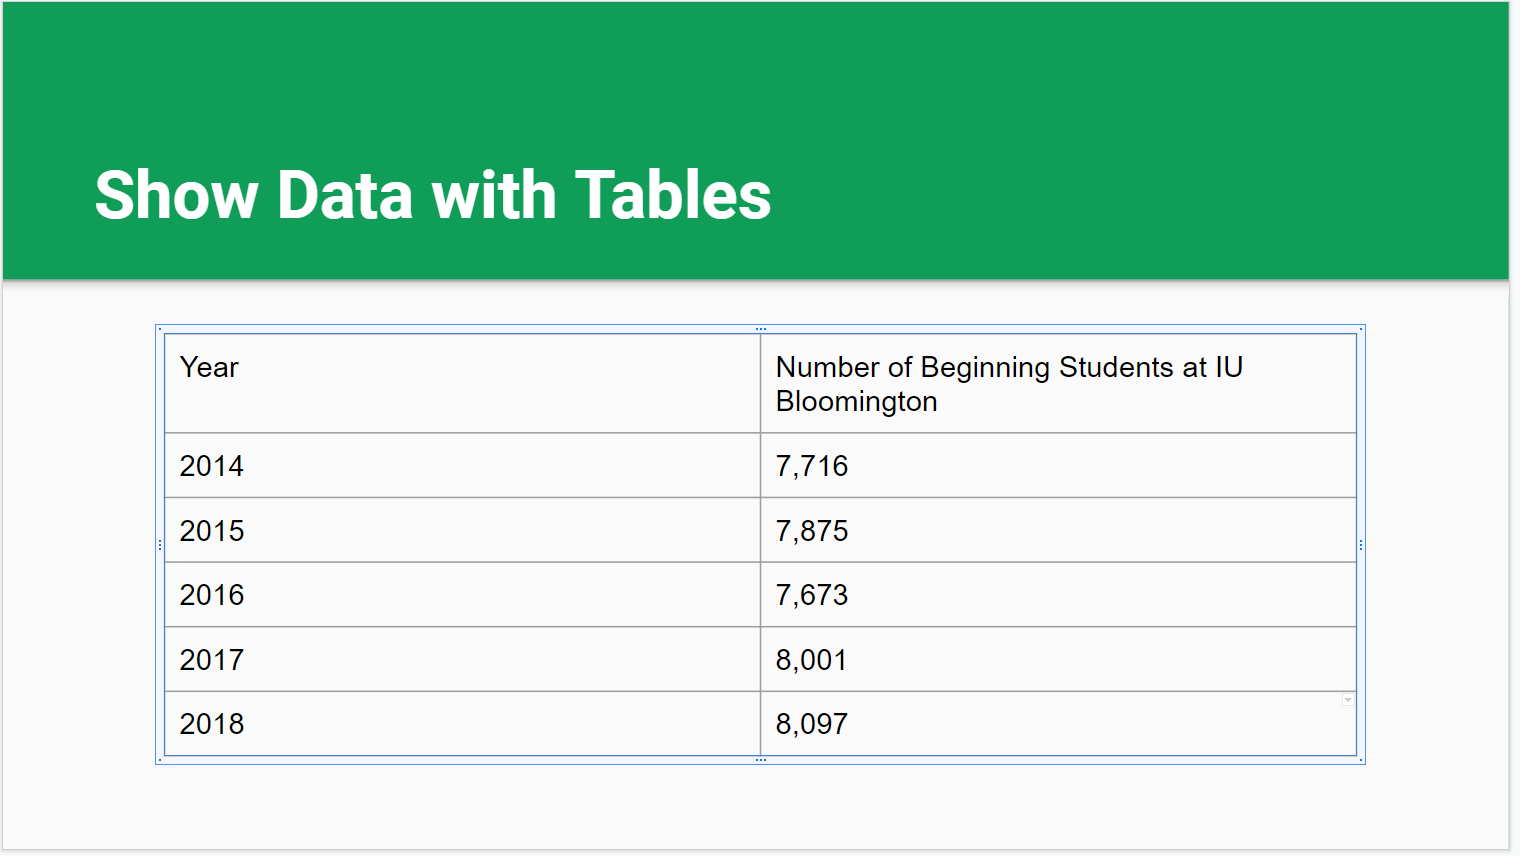 Image of the table with the year and number of students